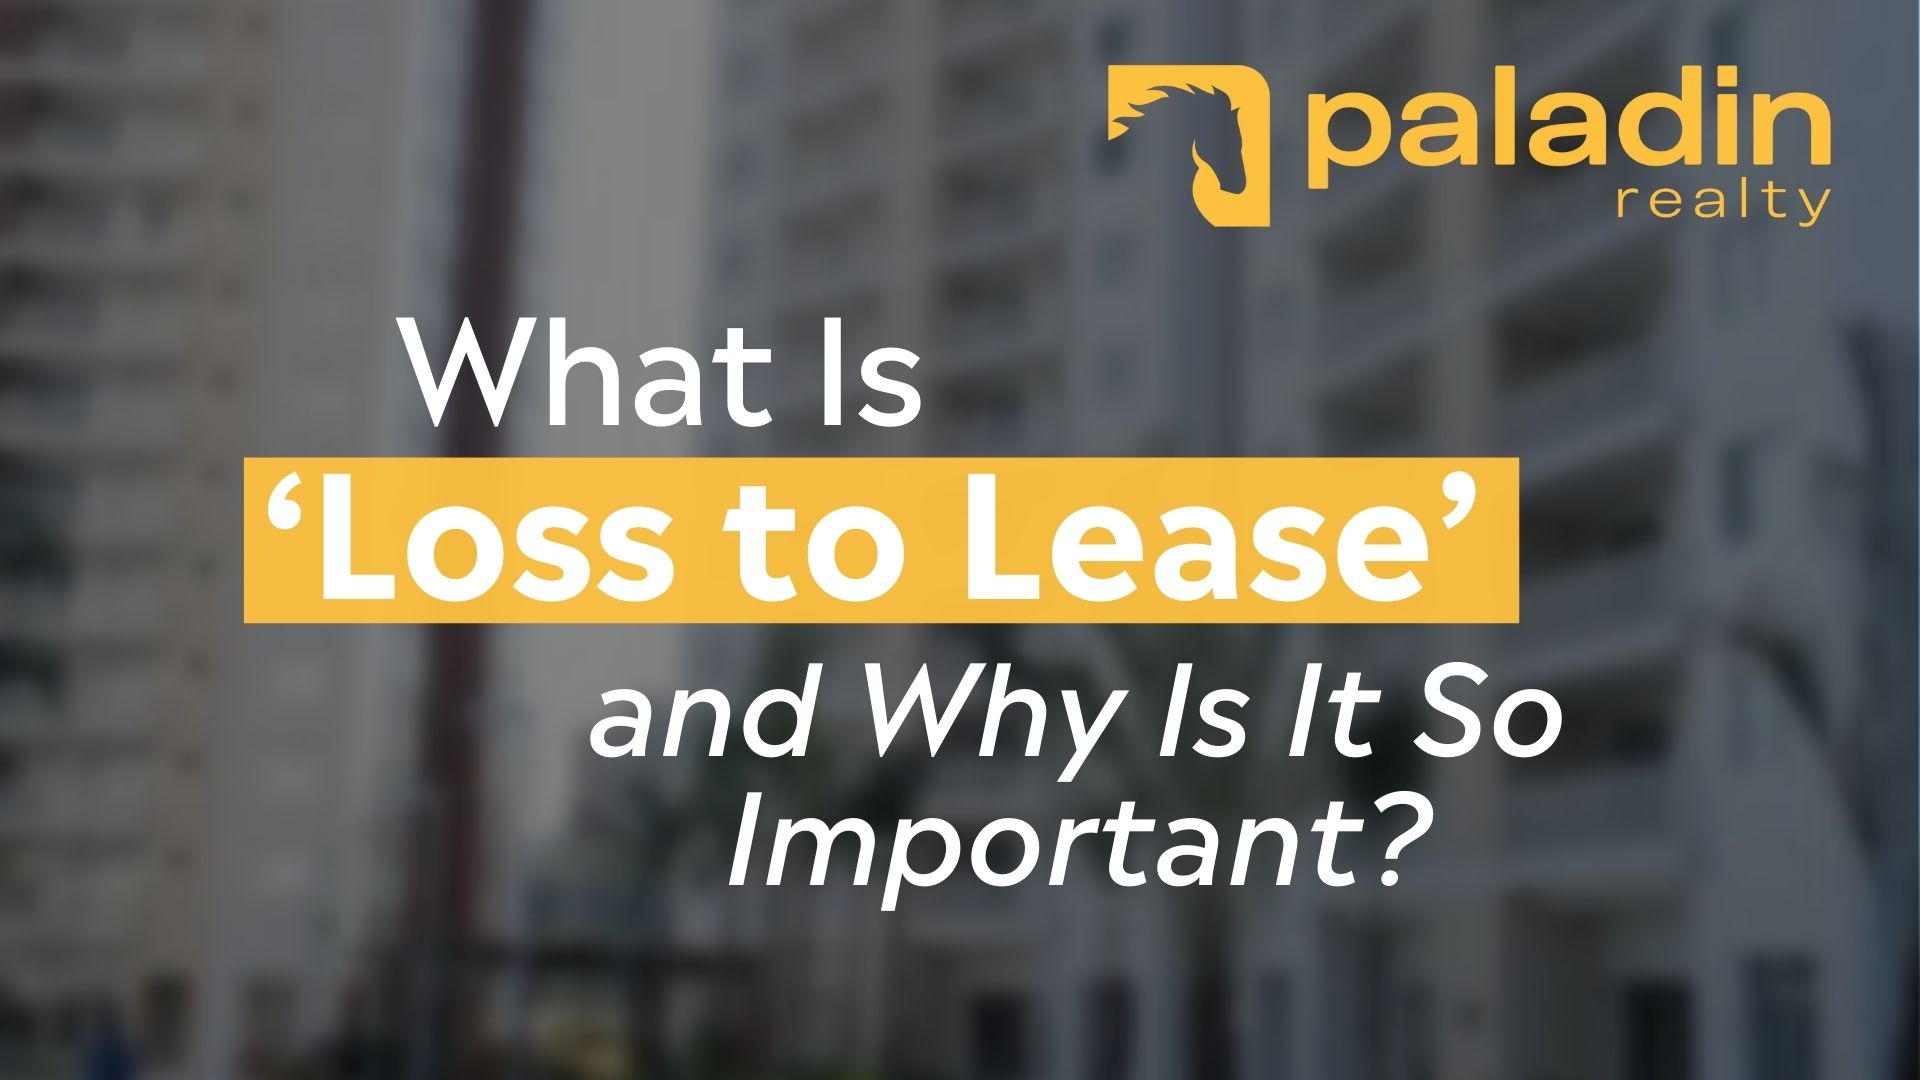 5b - FI [Web] - What Is Los to Lease